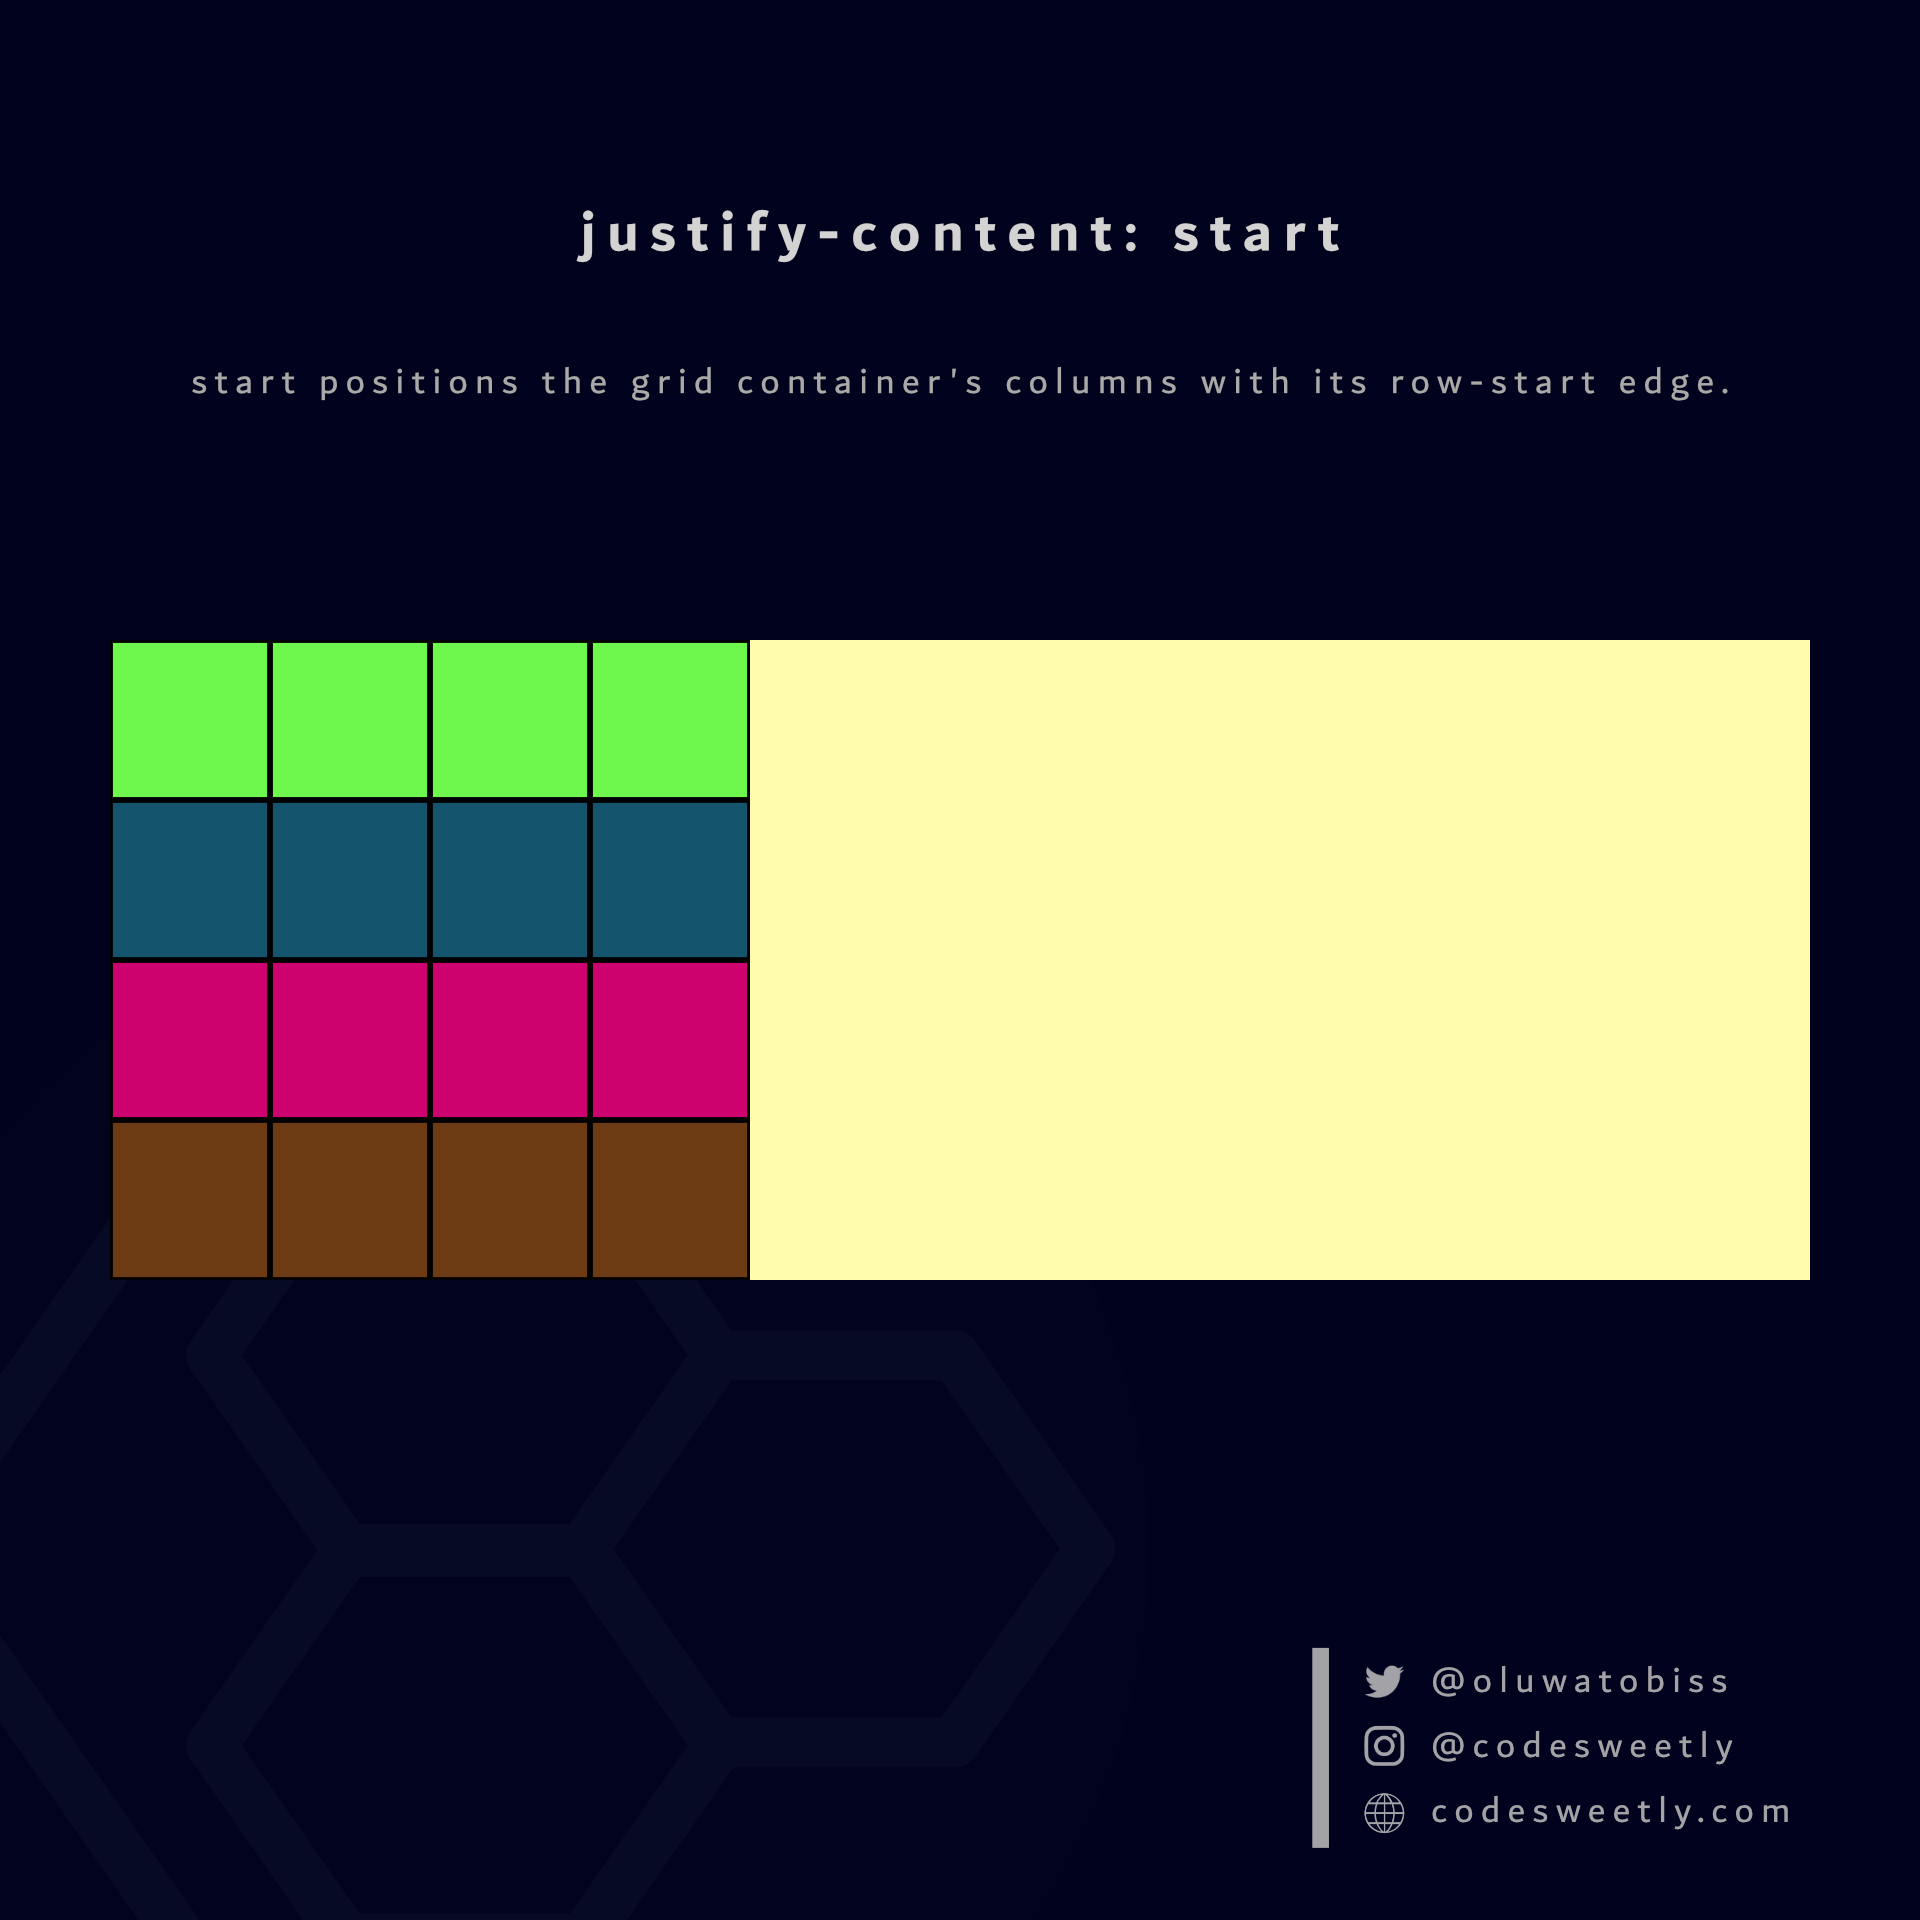 justify-content Property in CSS Grid Layouts